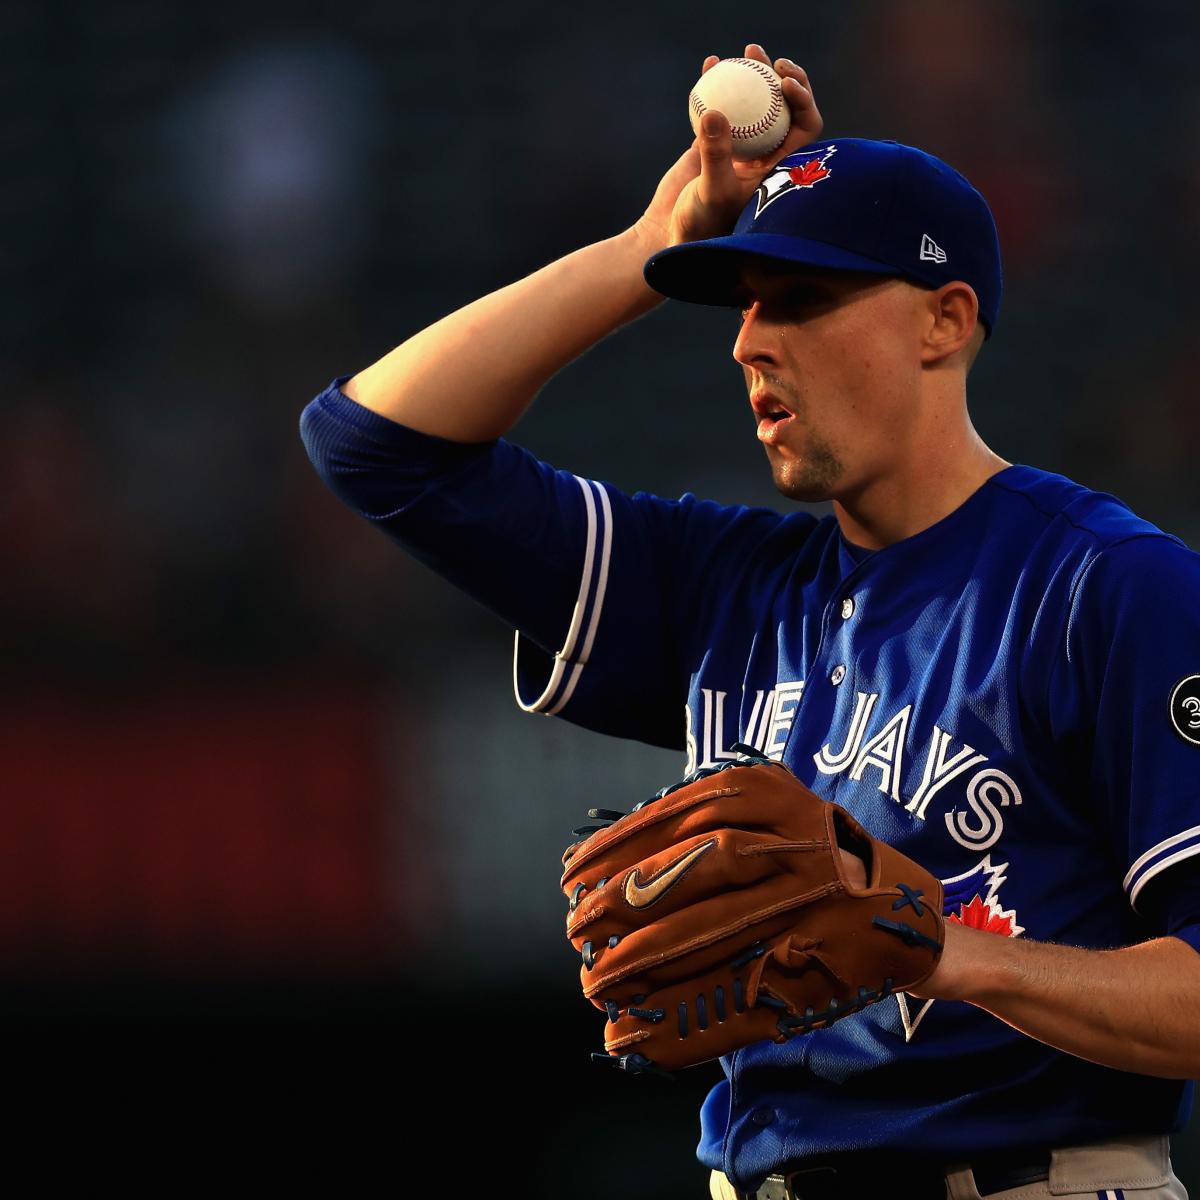 Toronto Blue Jays - Who doesn't love a jersey giveaway? Make sure to come  to the ballpark early this Wednesday and get your Aaron Sanchez Blue Replica  Jersey. Still tickets available